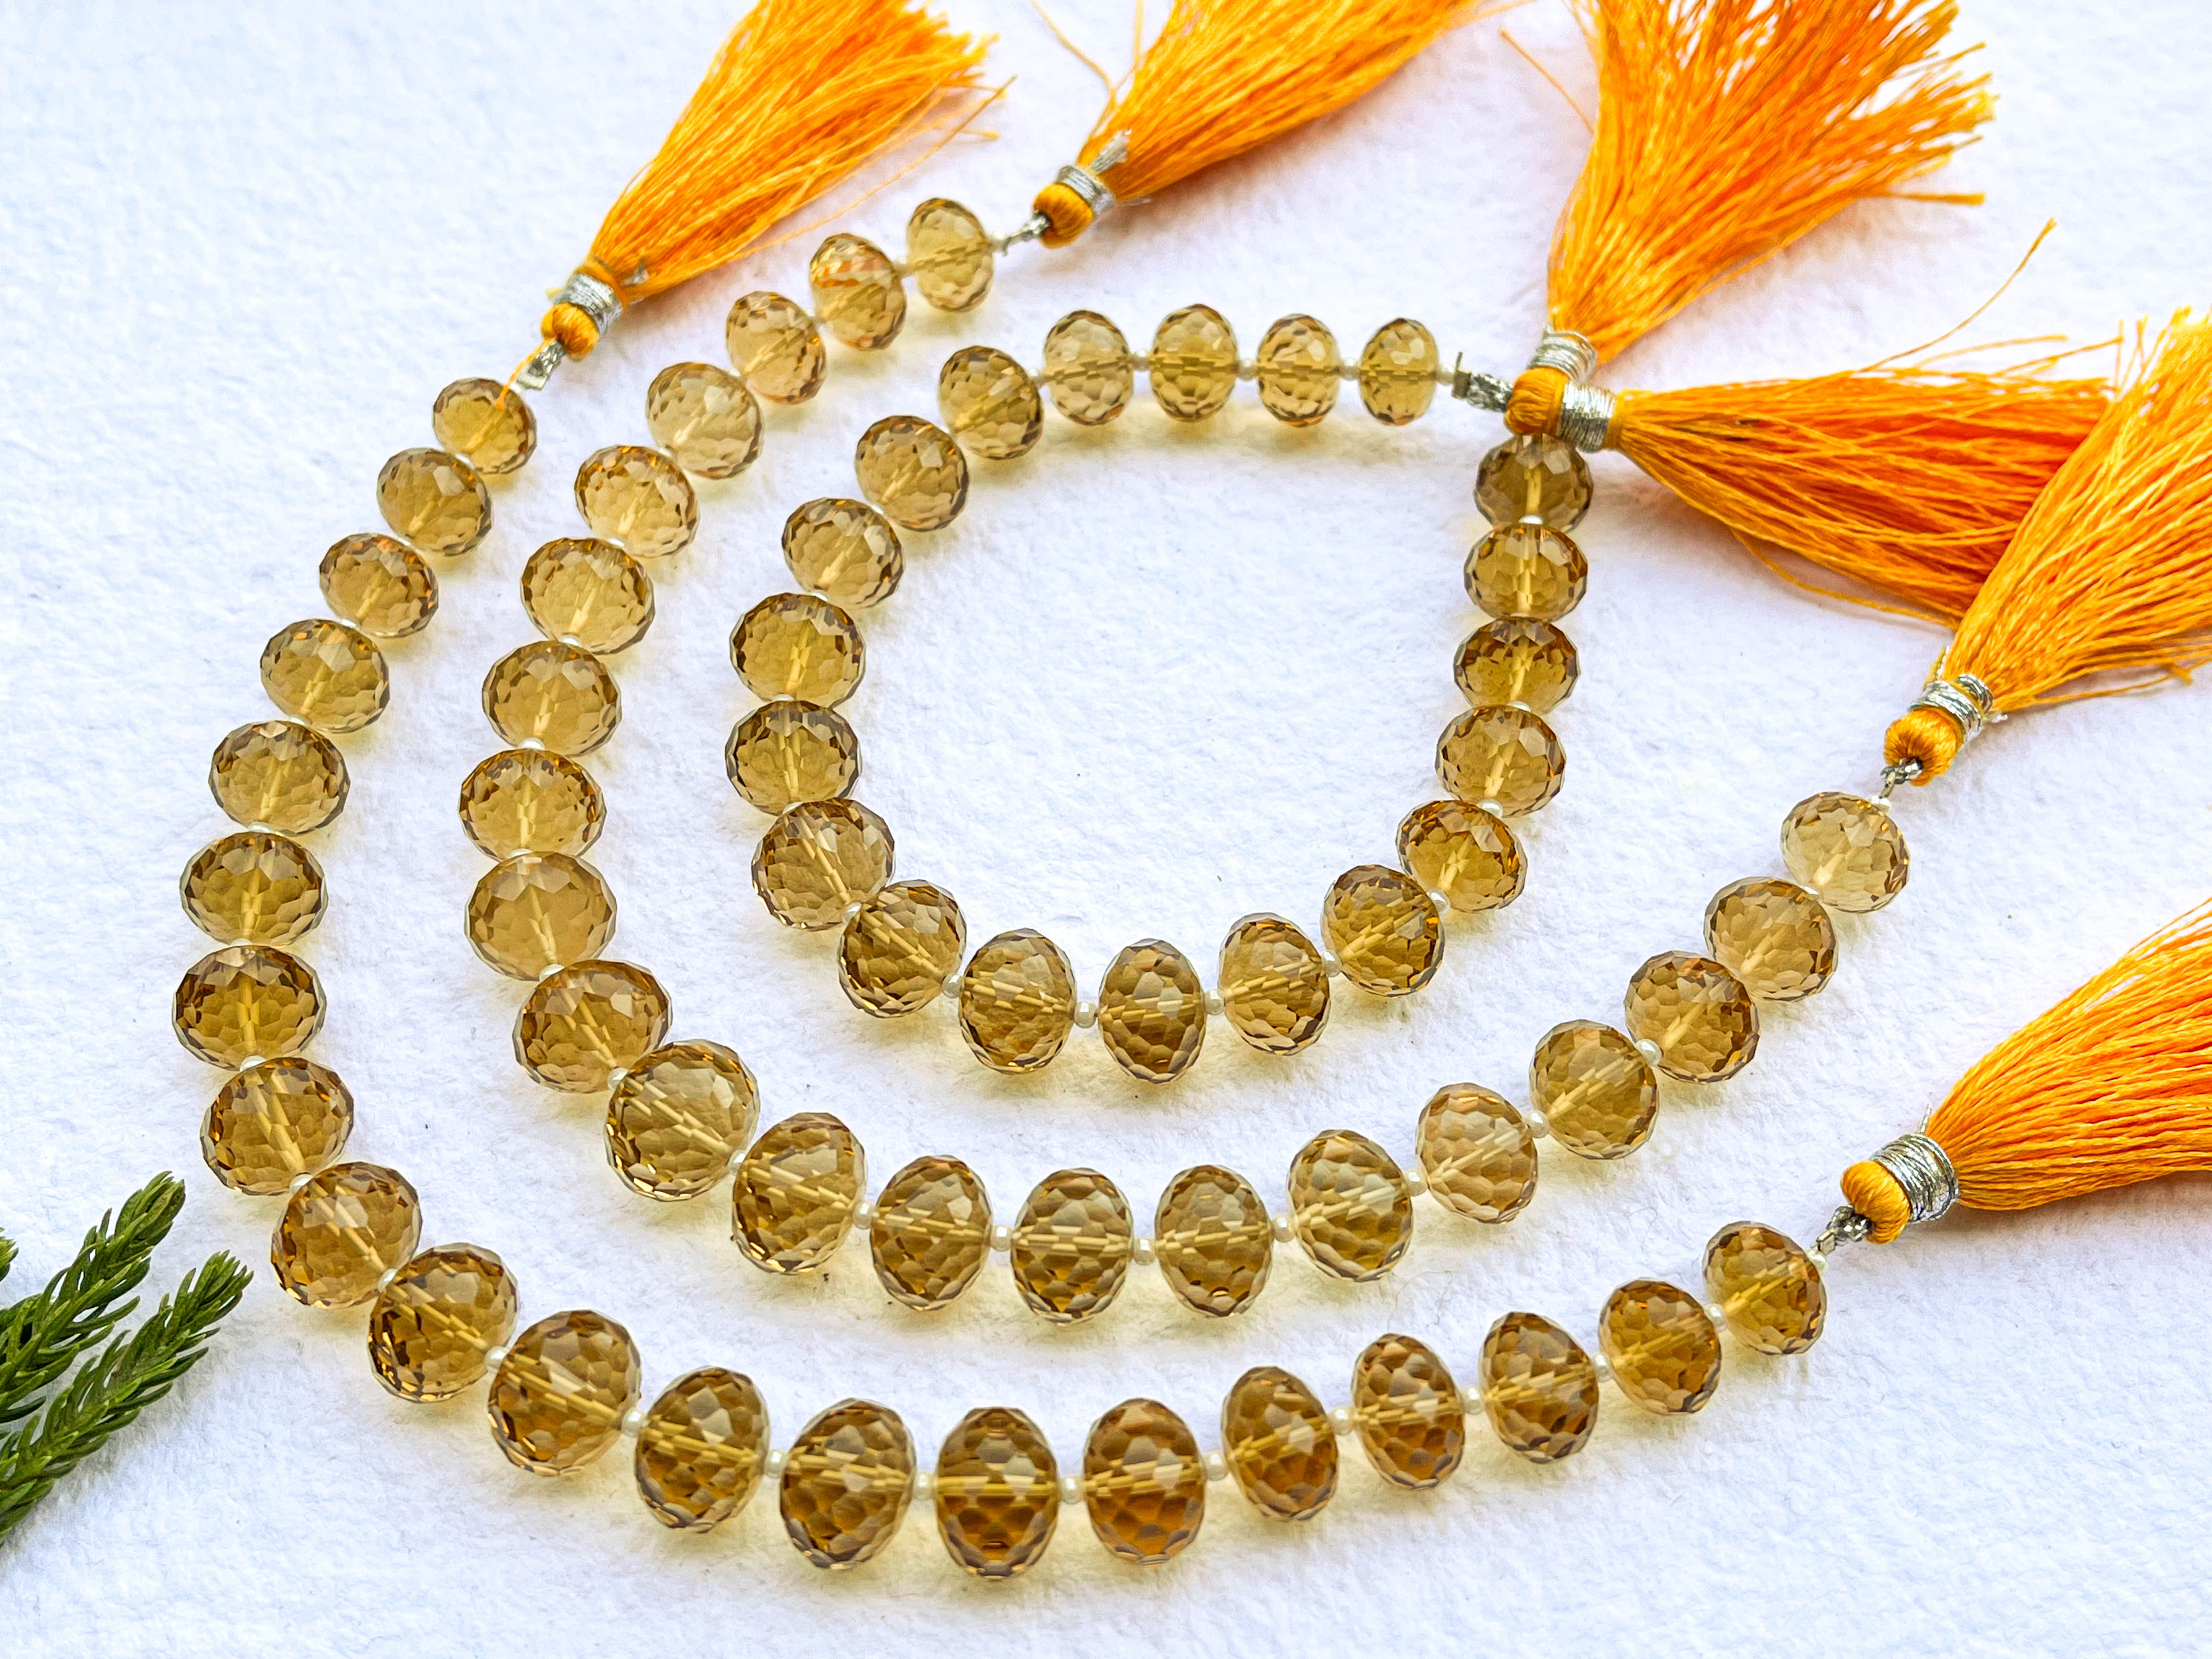 Beer Quartz Concave Cut Rondelle Beads Beadsforyourjewelry